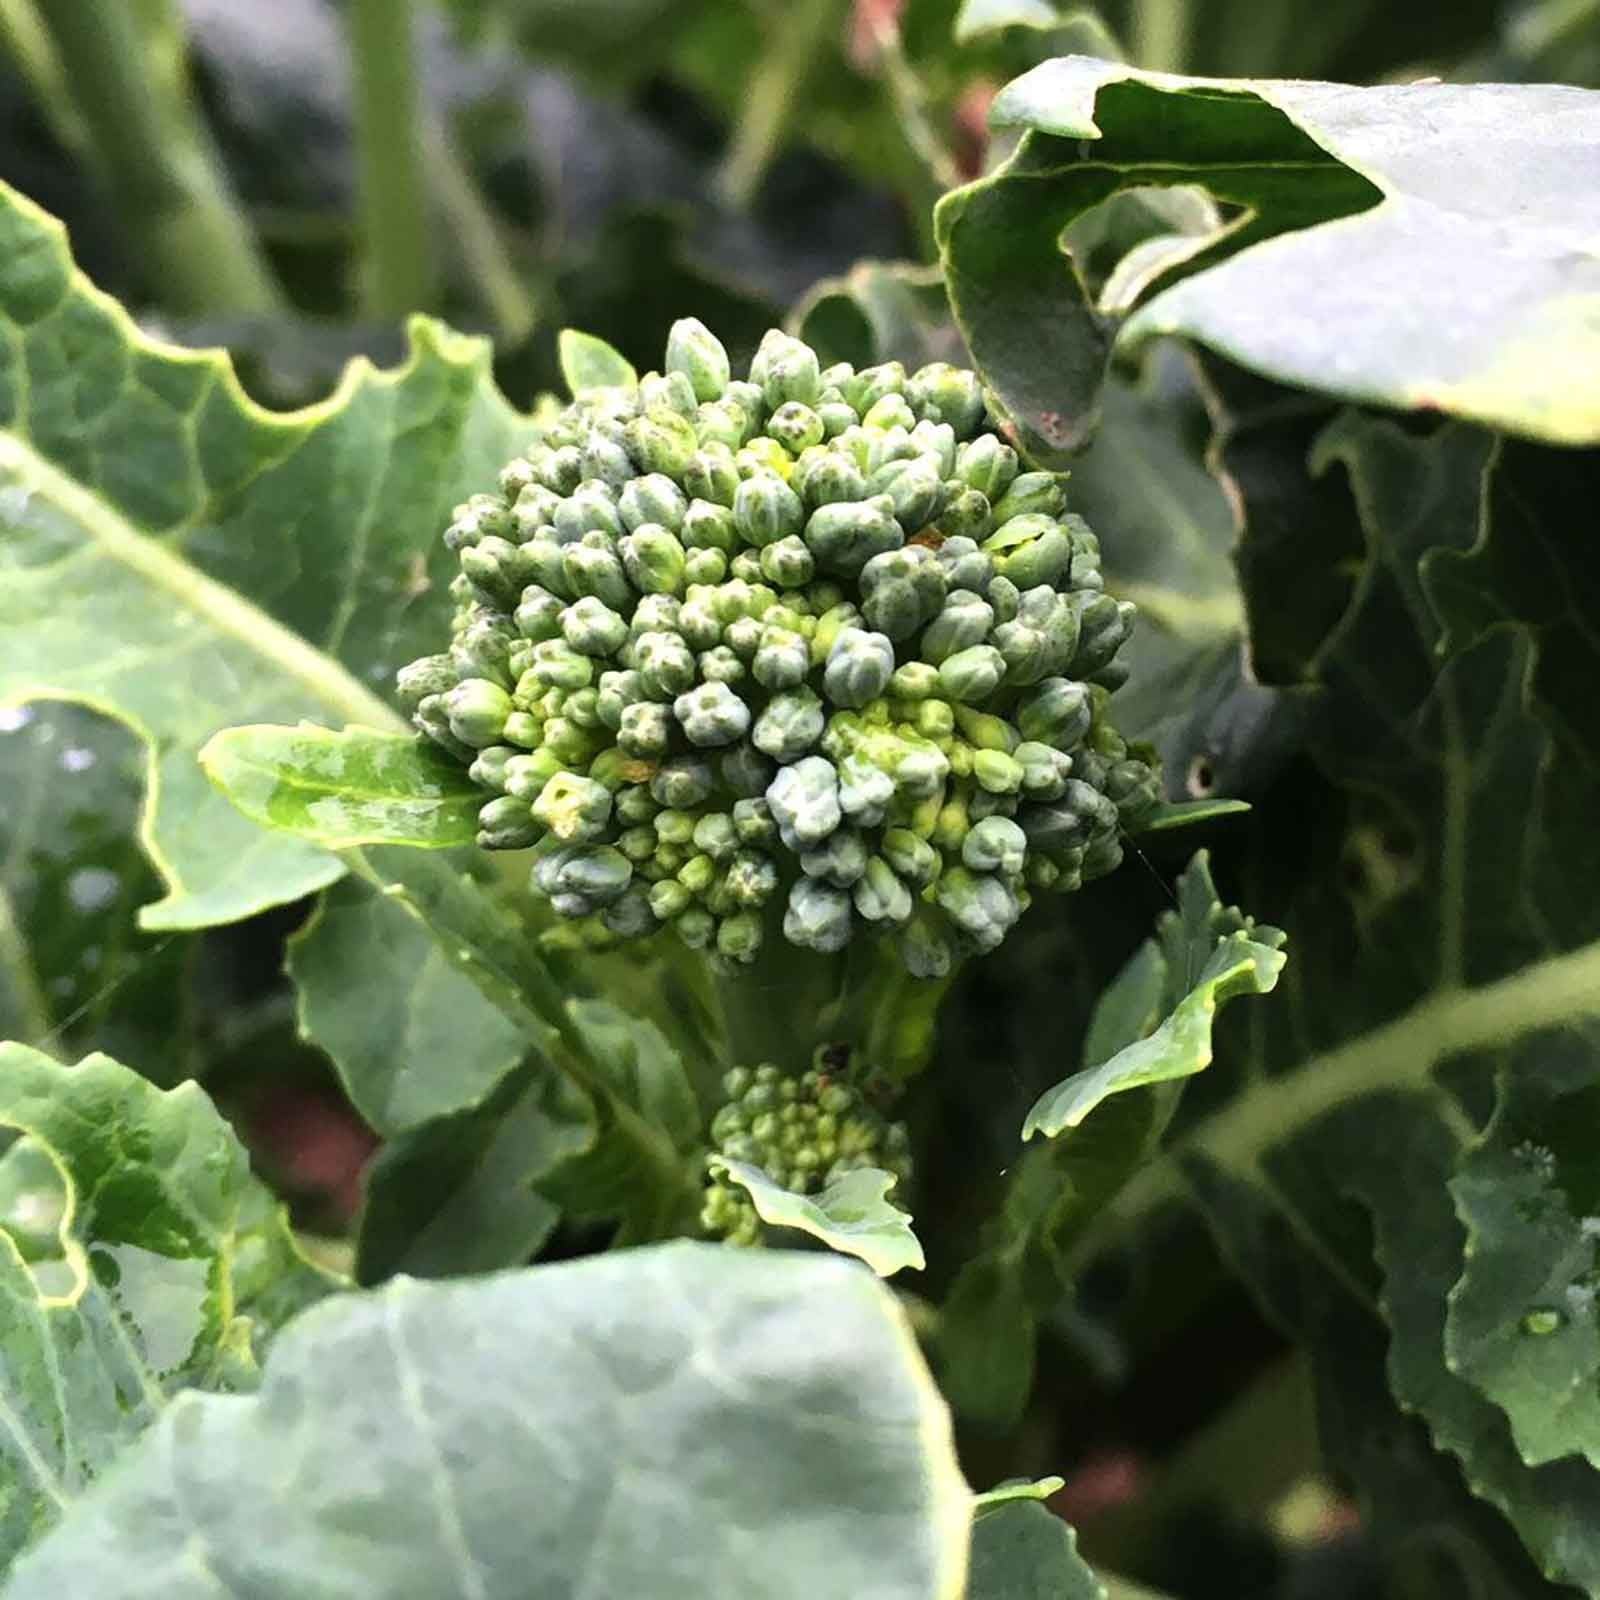 Autumn - Calabrese (Broccoli) - Green Sprouting (10 Plants) Organic